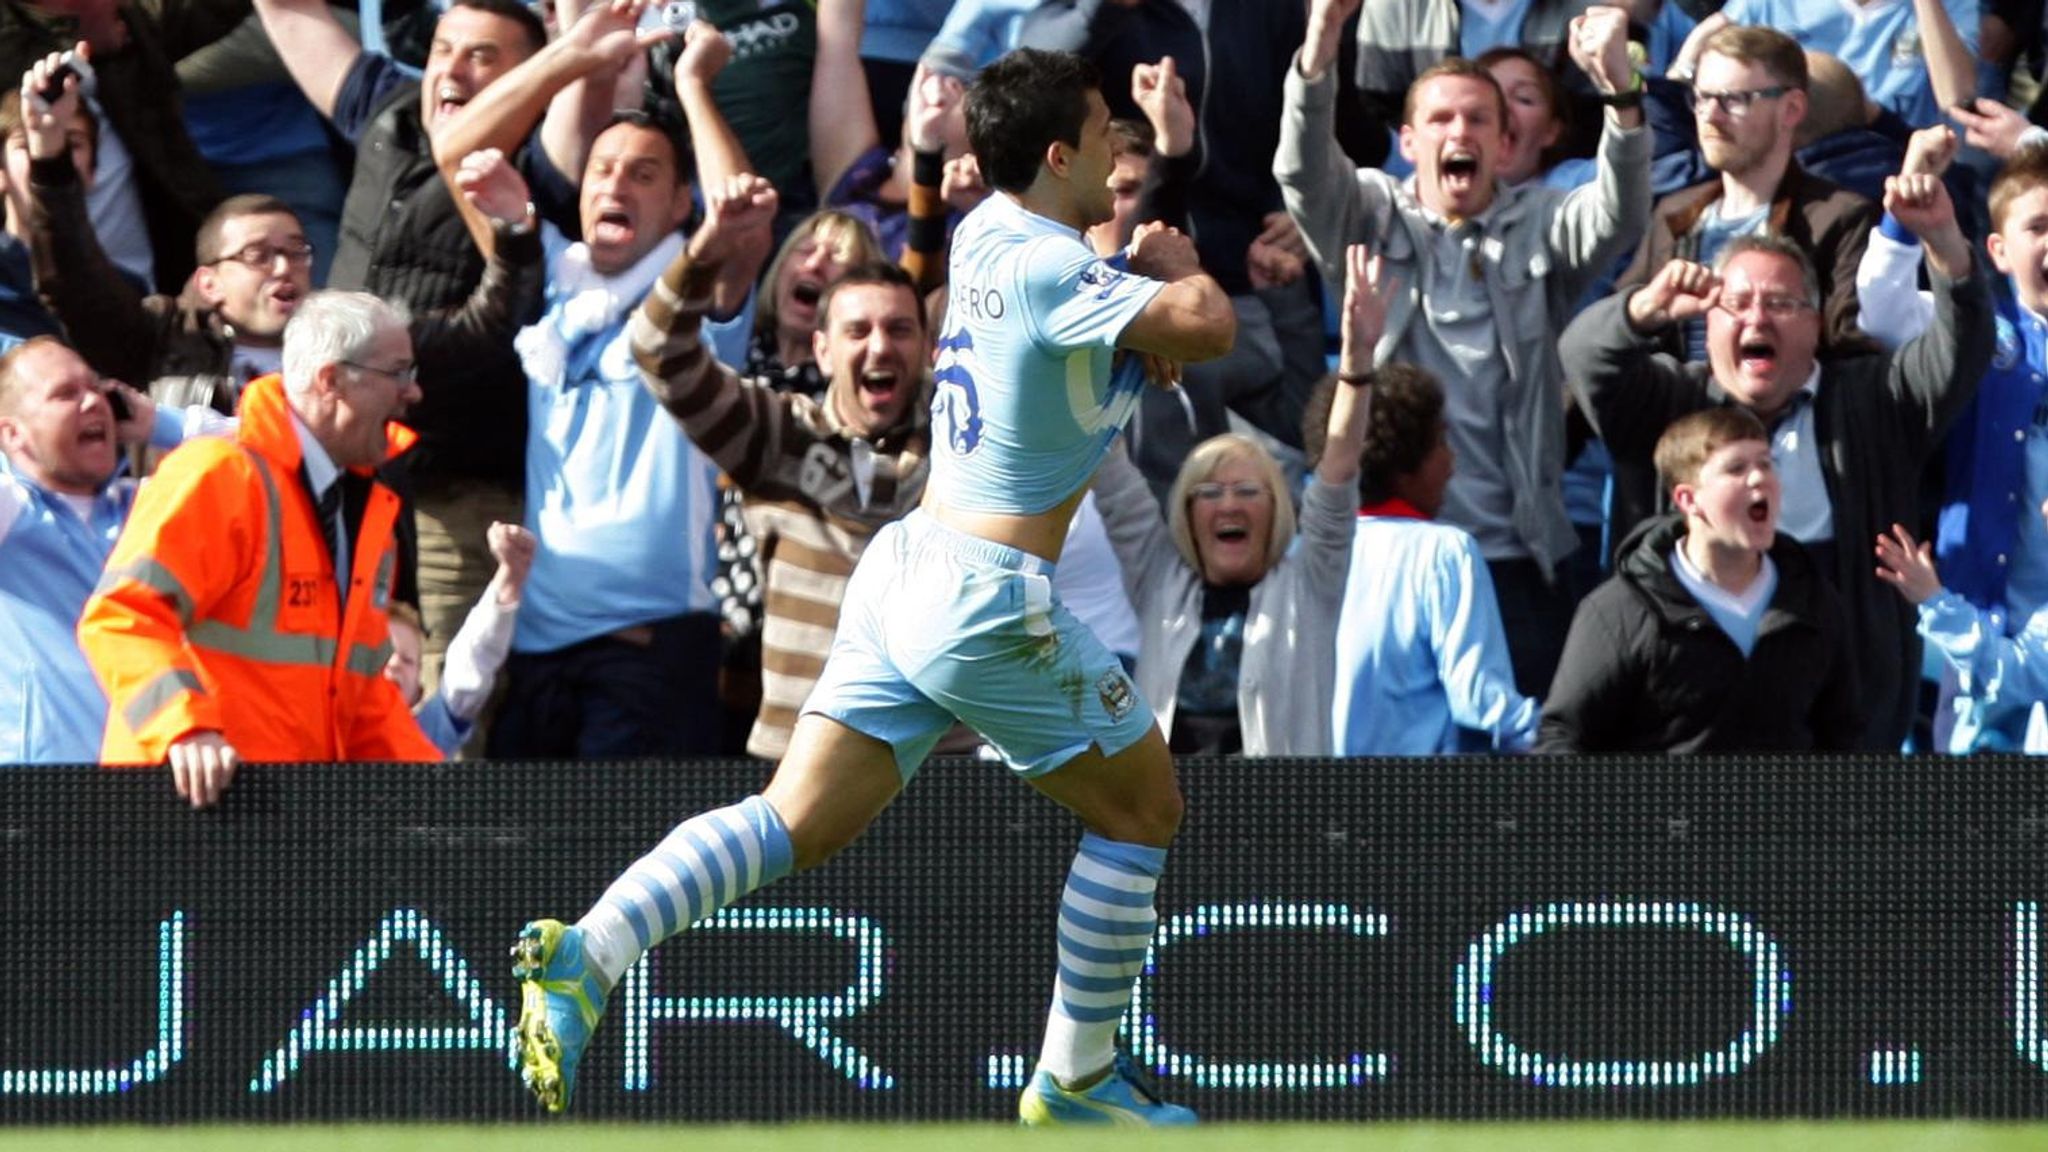 Shirt Worn By Aguero When He Scored Famous Title Winning Goal For Manchester City Up For Sale